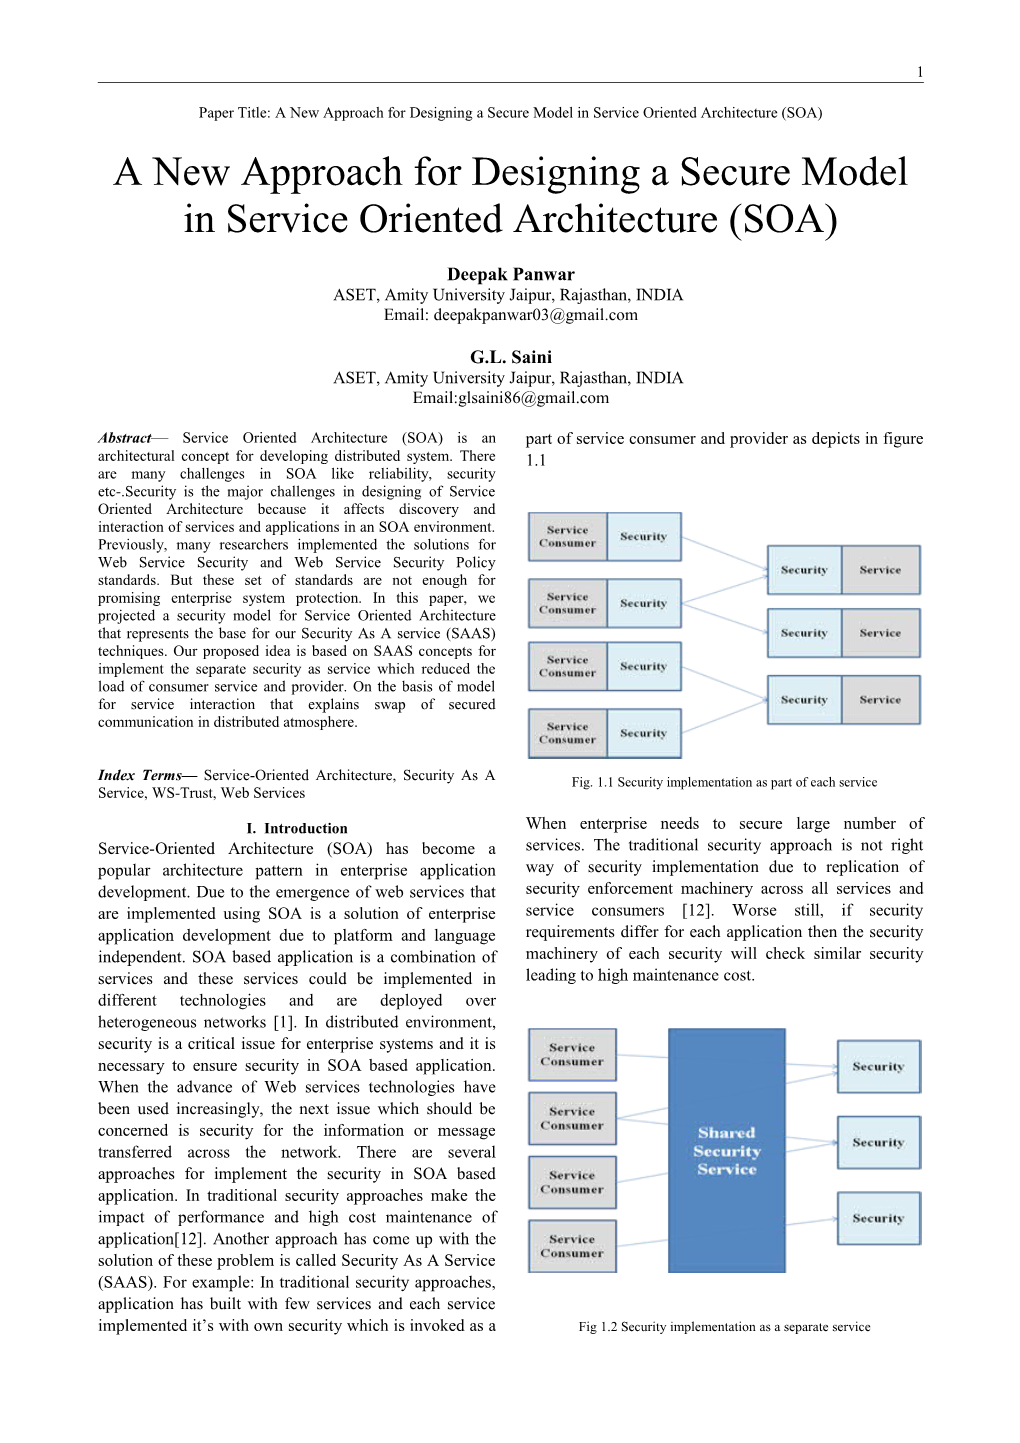 A New Approach for Designing a Secure Model in Service Oriented Architecture (SOA)